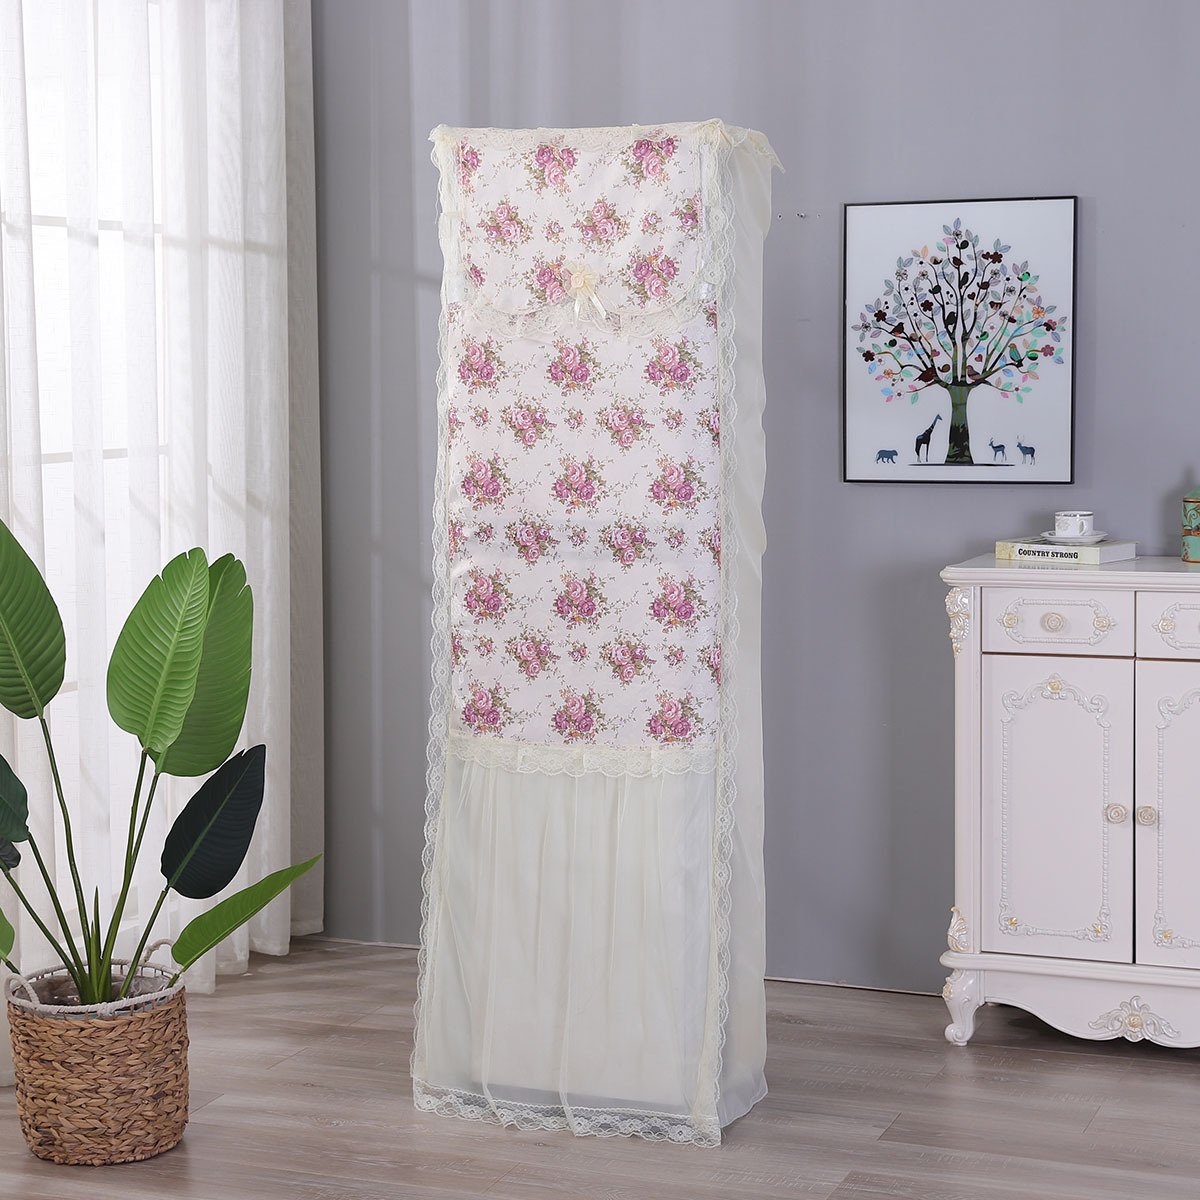 JLY Habitat L&#39;Oreal Countryside Fabric art Lace Air conditioner cover Gree Guiji cover Beauty Cabinet air conditioner Cover Boot